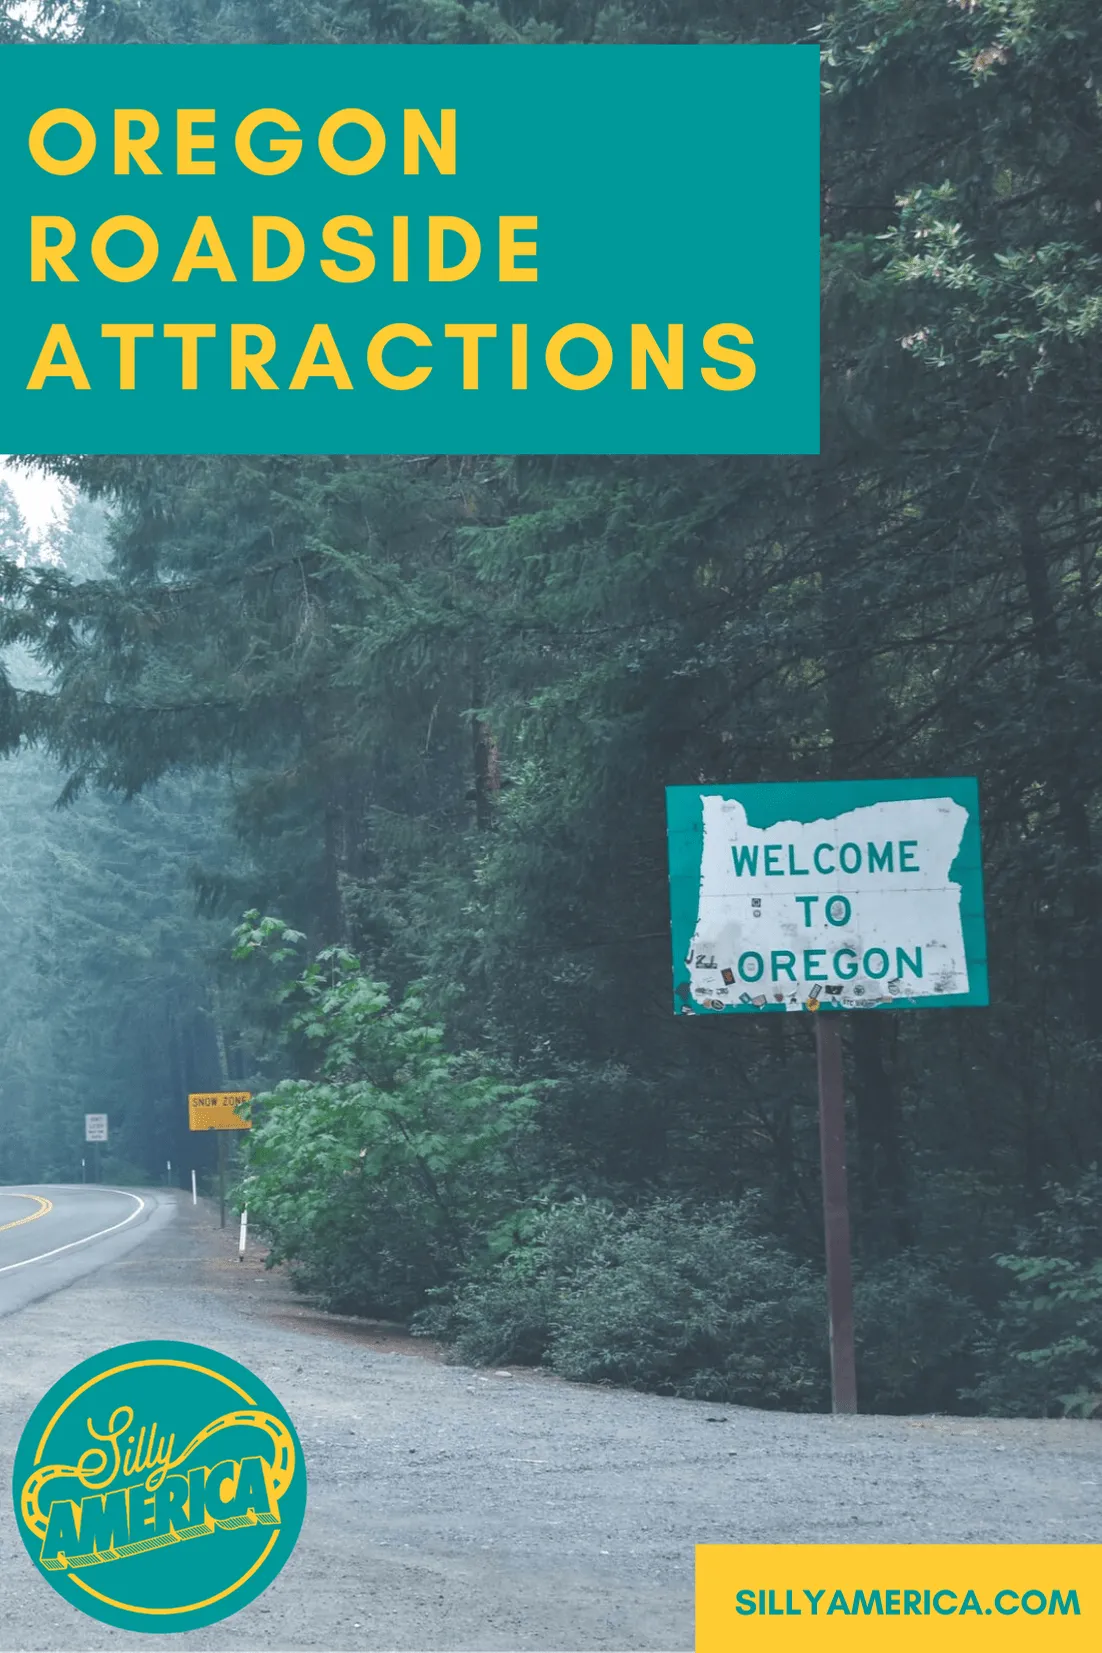 The best Oregon roadside attractions to visit on an Oregon road trip. Add these roadside oddities to your travel bucket list, route map, or itinerary!  #OregonRoadsideAttractions #OregonRoadsideAttraction #RoadsideAttractions #RoadsideAttraction #RoadTrip #OregonRoadTrip #OregonRoadTripMap #OregonRoadTripItinerary #ThingsToDoInOregon #PlacesToVisitInOregon #OregonCampingRoadTrip #OregonTravelGuide #OregonRoadTripBucketLists #OregonBucketList #WeirdRoadsideAttractions